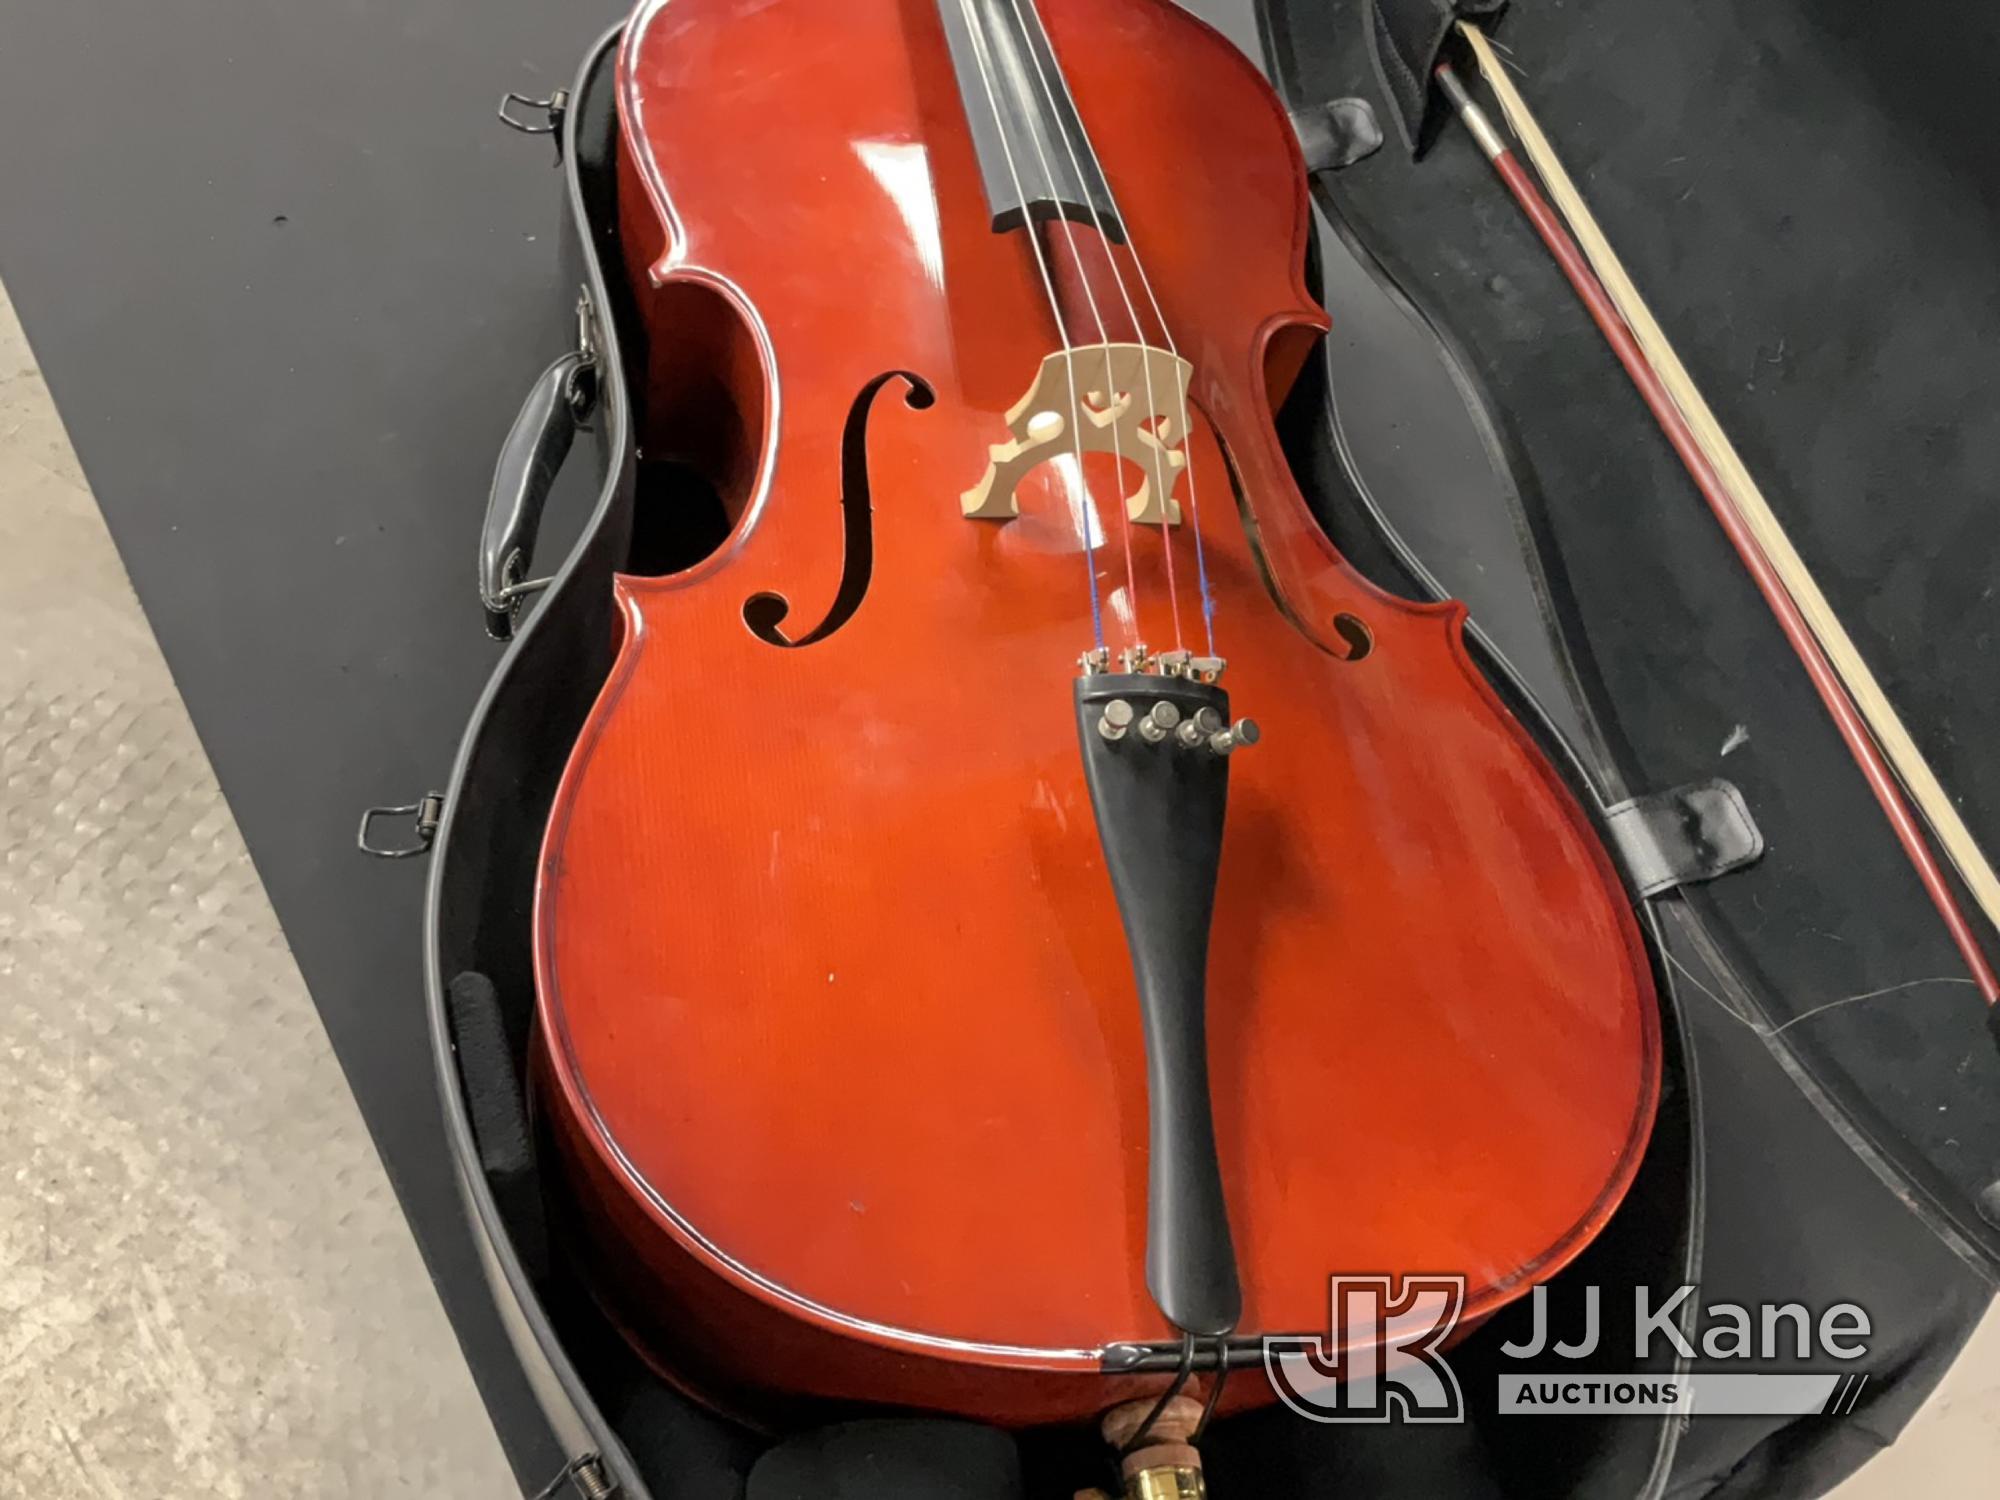 (Jurupa Valley, CA) Cello With Hardcase (Used) NOTE: This unit is being sold AS IS/WHERE IS via Time